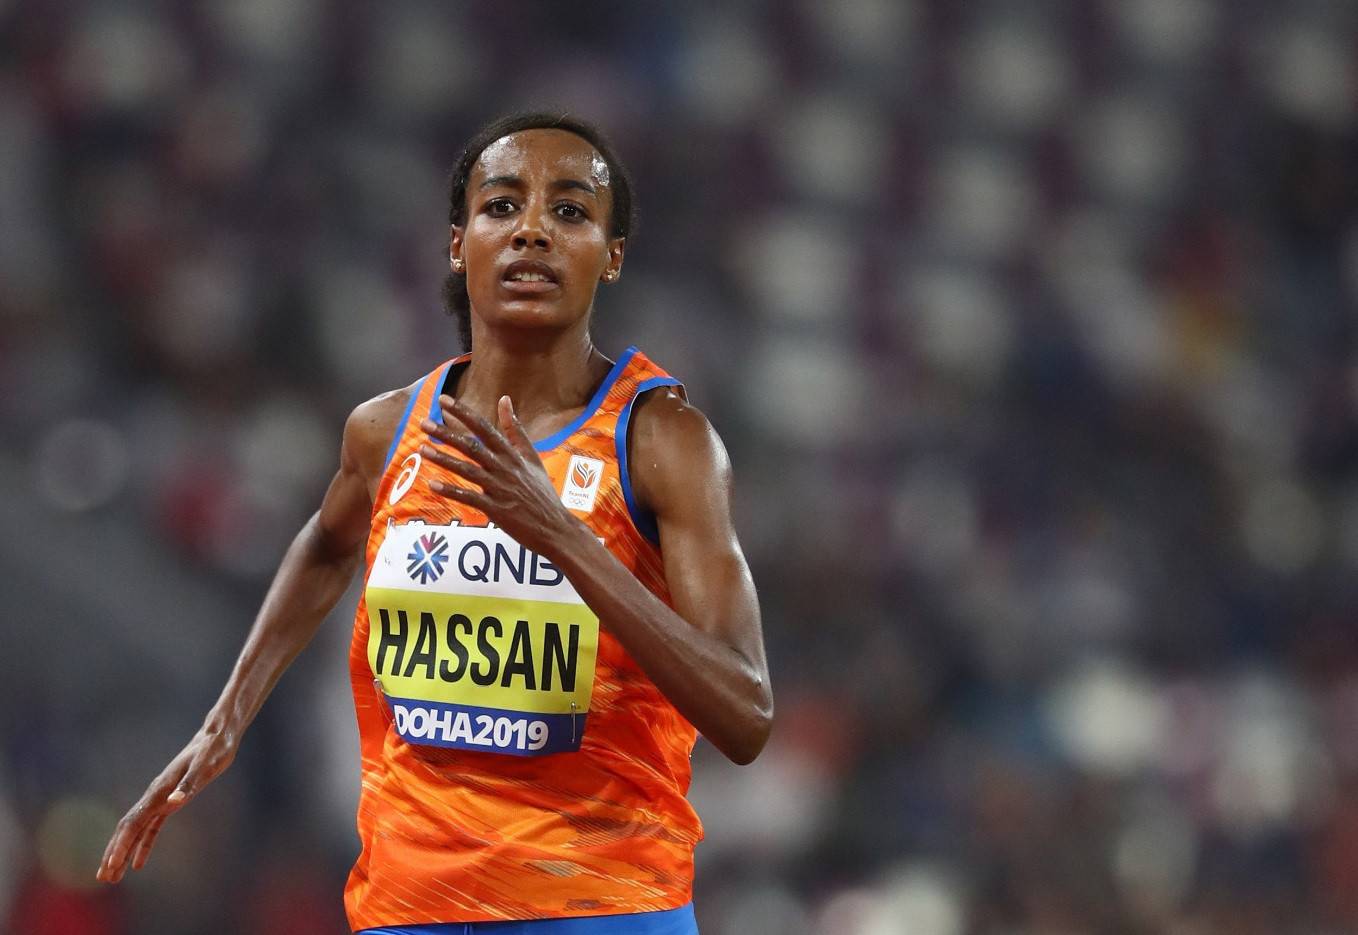 Tokyo Olympics: Sifan Hassan trips and falls but still wins first place 5,000m gold